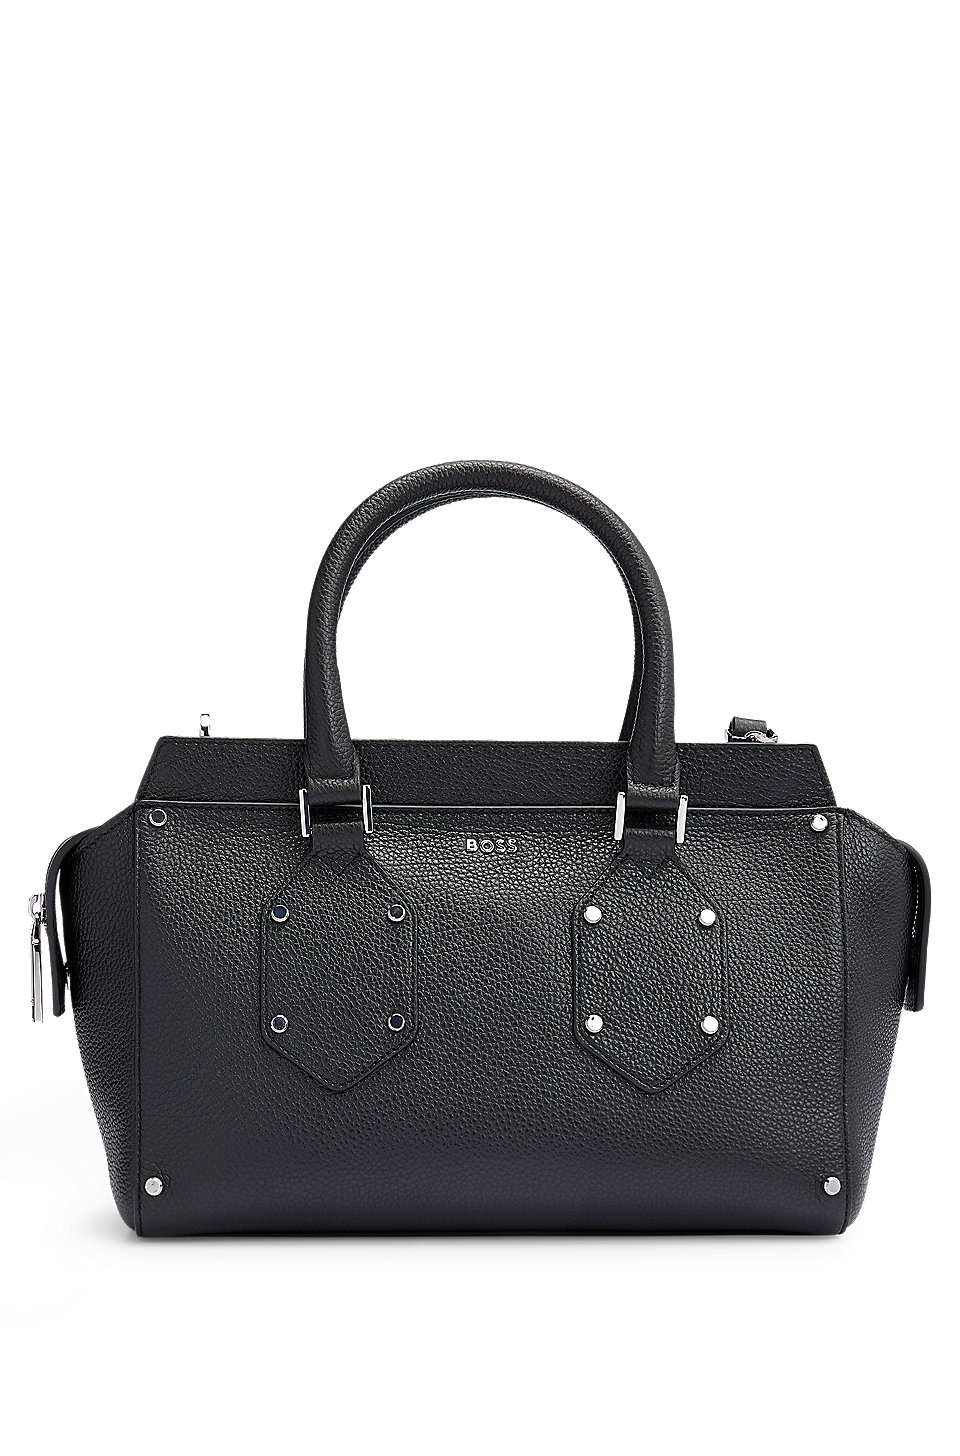 BOSS - Tote bag in grained leather with polished logo lettering